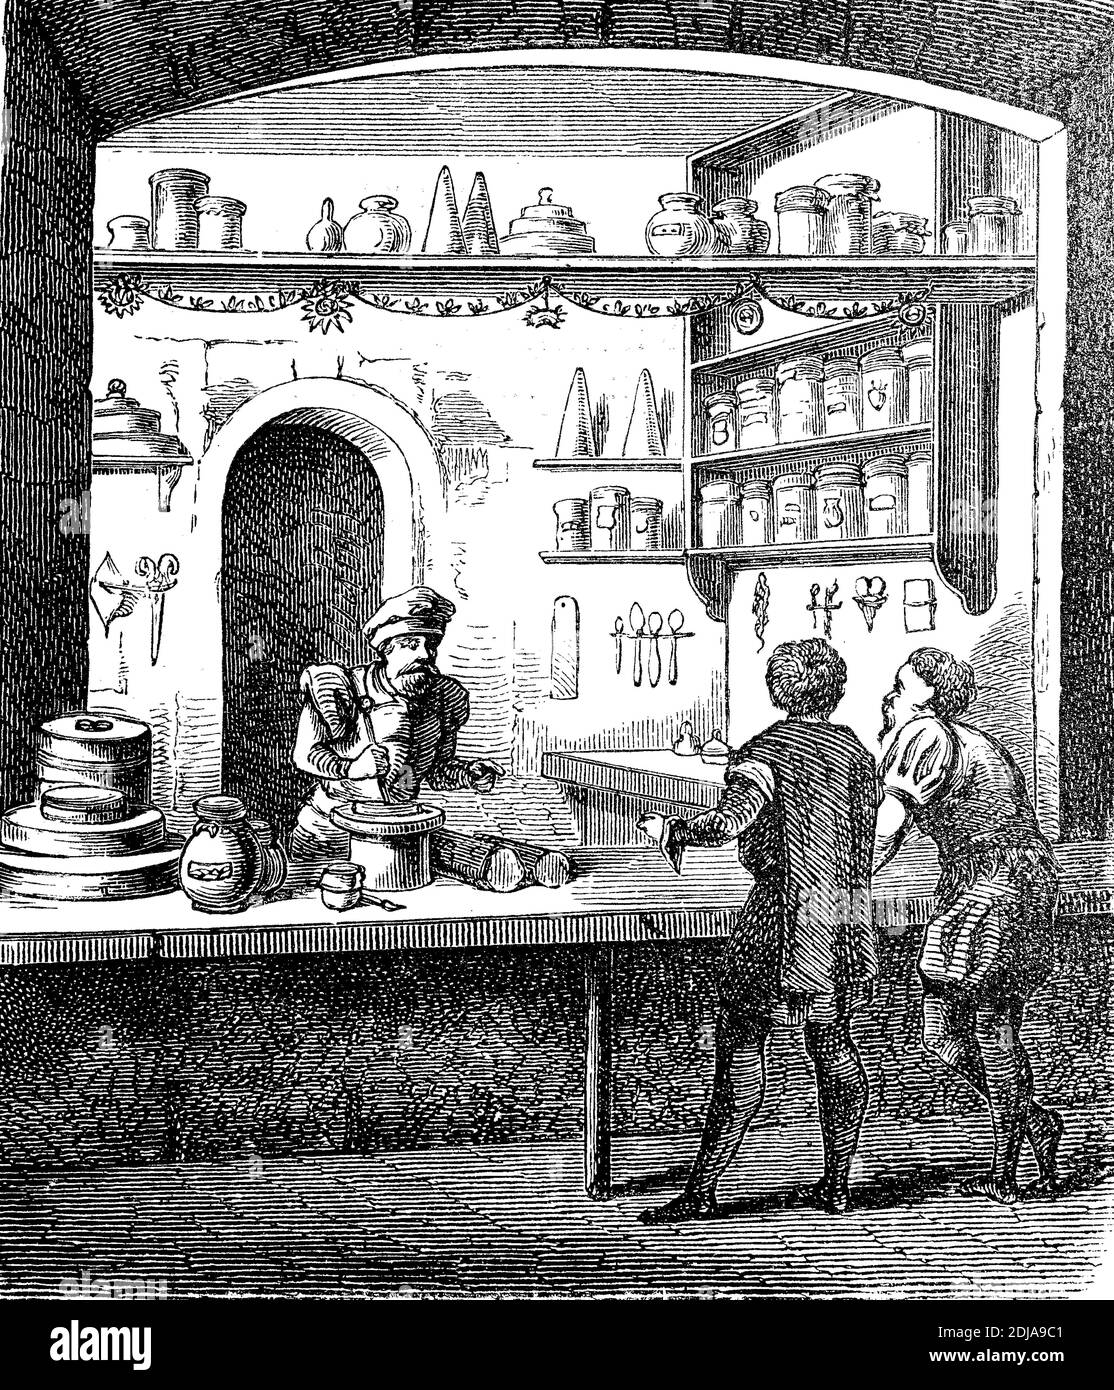 Pharmacy in France from the 16th century  /  Apotheke in Frankreich aus dem 16. Jahrhundert, Historisch, historical, digital improved reproduction of an original from the 19th century / digitale Reproduktion einer Originalvorlage aus dem 19. Jahrhundert, Stock Photo